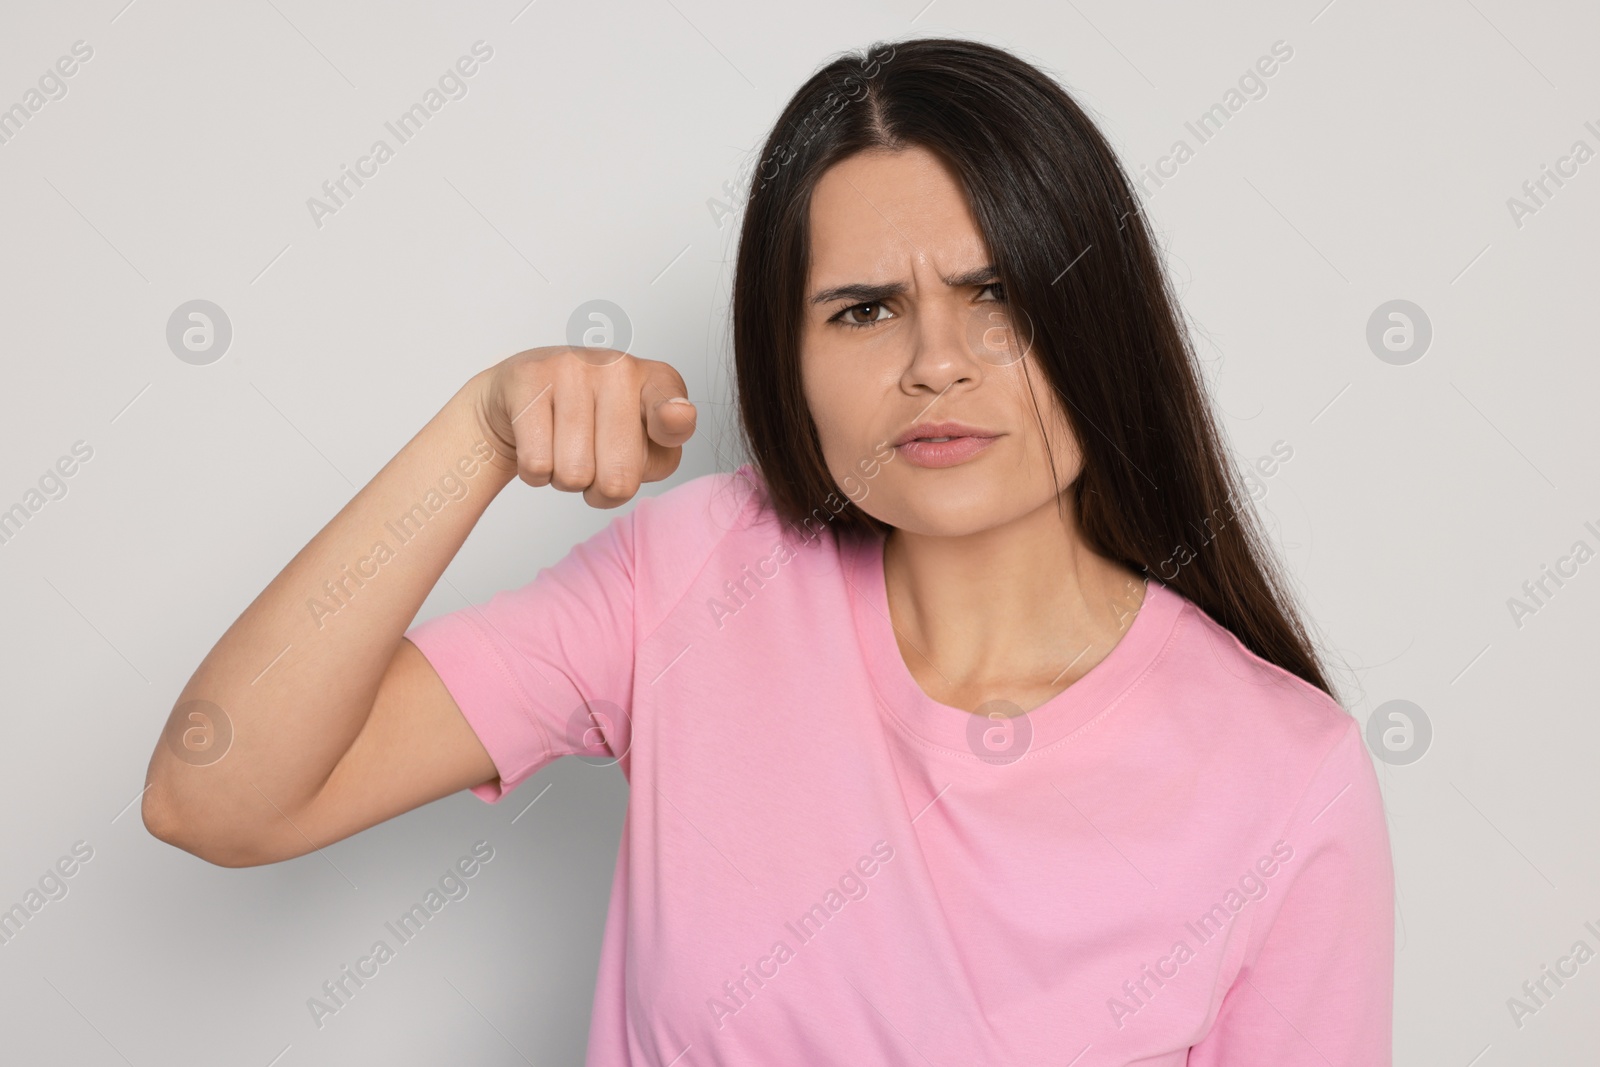 Photo of Aggressive young woman pointing on light grey background